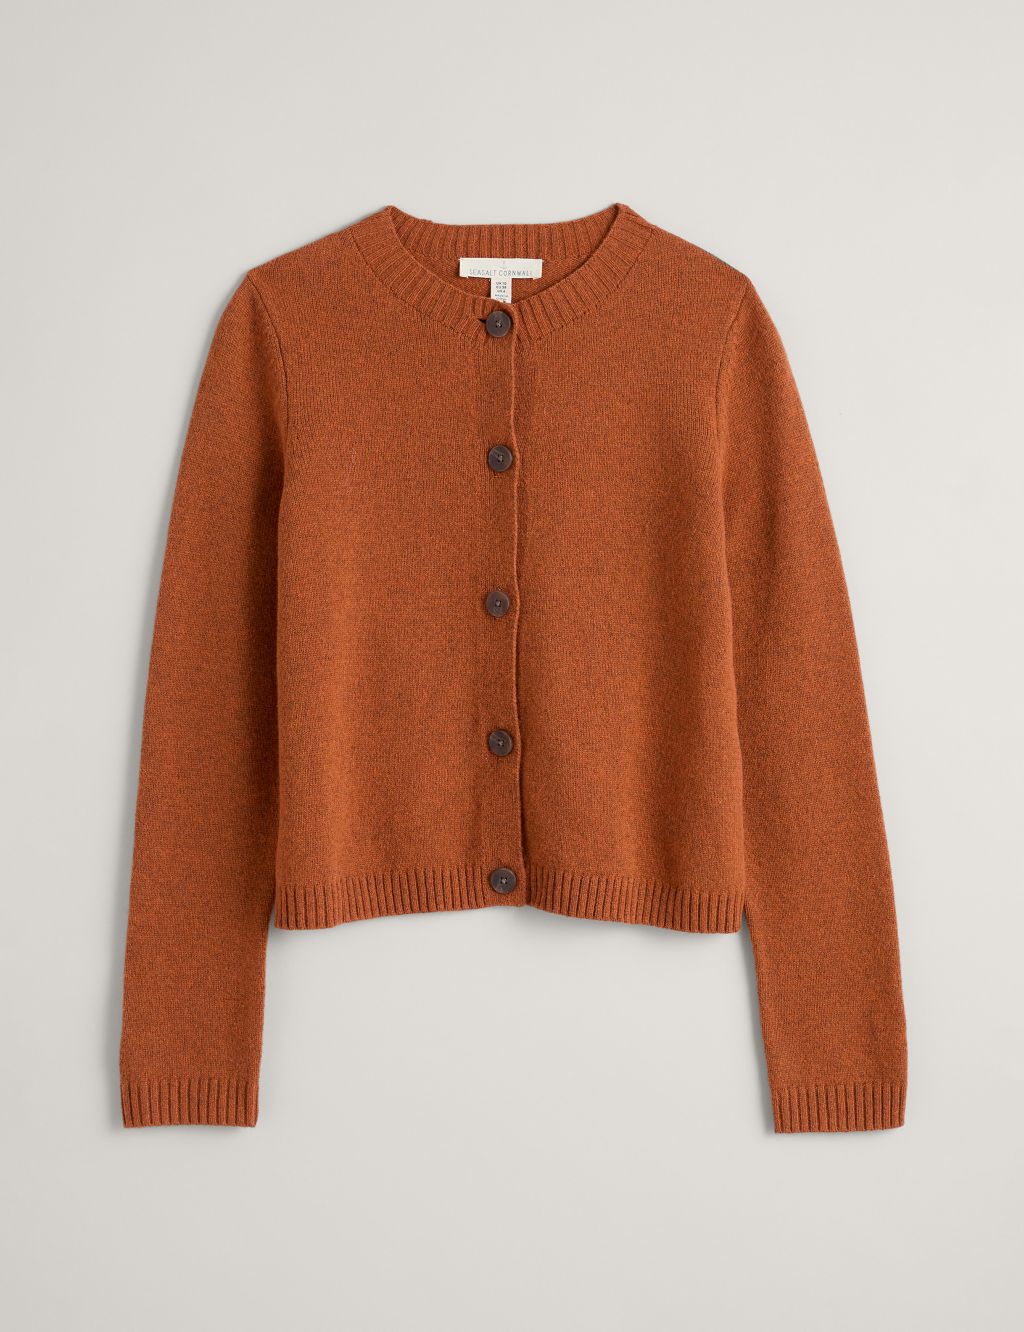 Merino Wool Rich Button Front Cardigan image 2